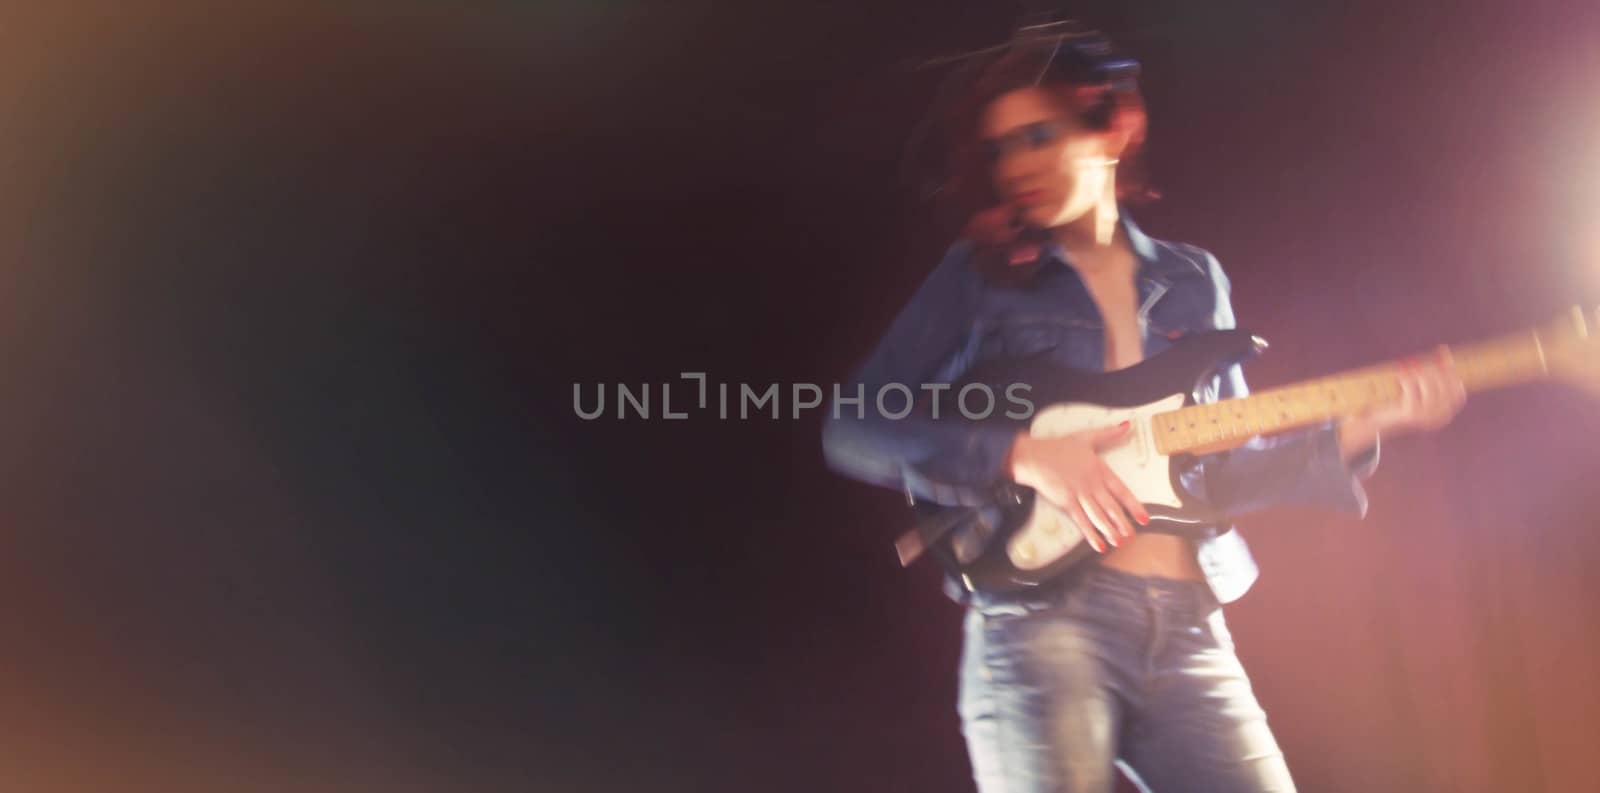 woman play electric guitar vintage photo background